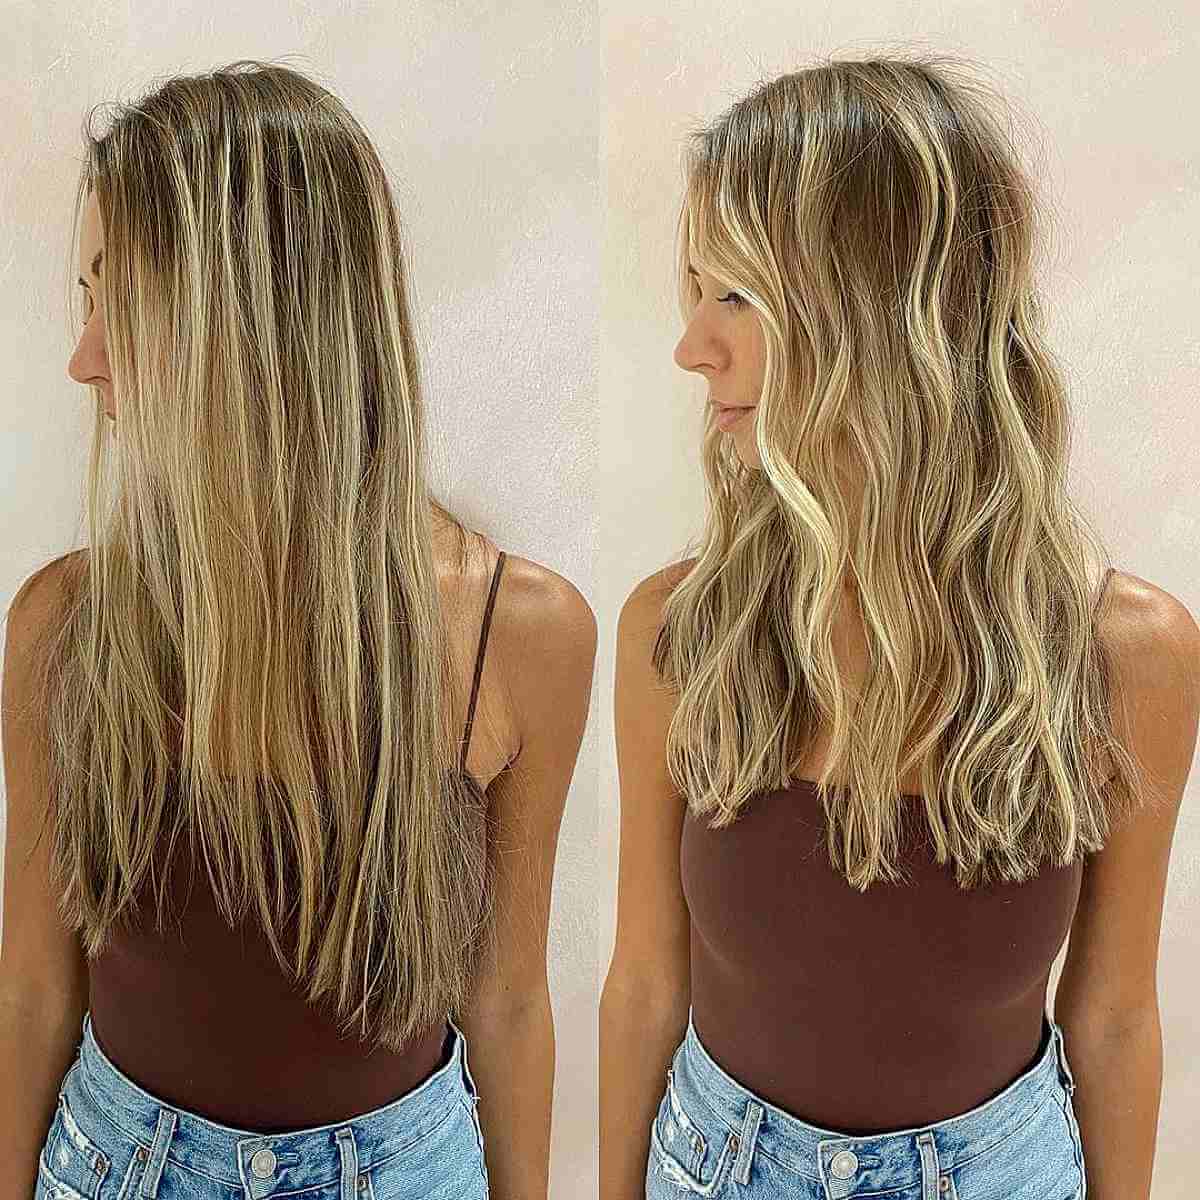 21 of the Best Medium Long Hairstyles for 2023